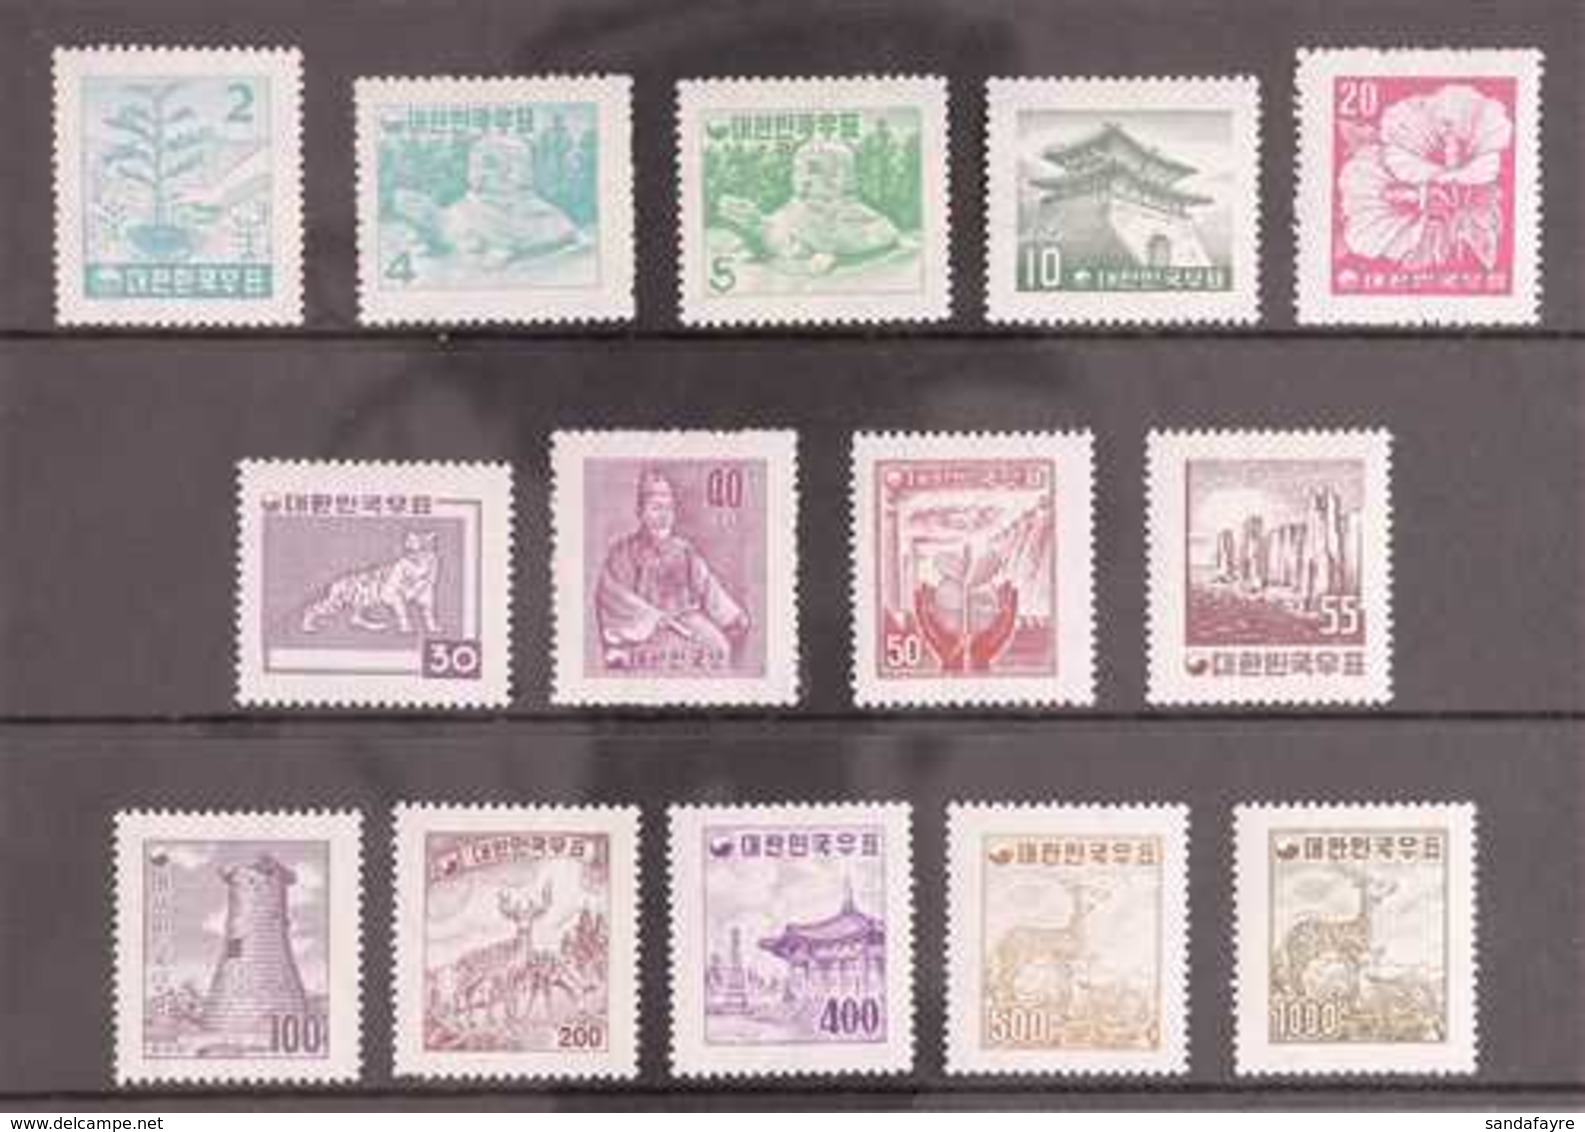 1957 Complete Definitive Set, Redrawn With No Hwan Symbol, Watermark Wavy Lines, Scott 249/262, Or Between SG 273 And 28 - Korea (Zuid)